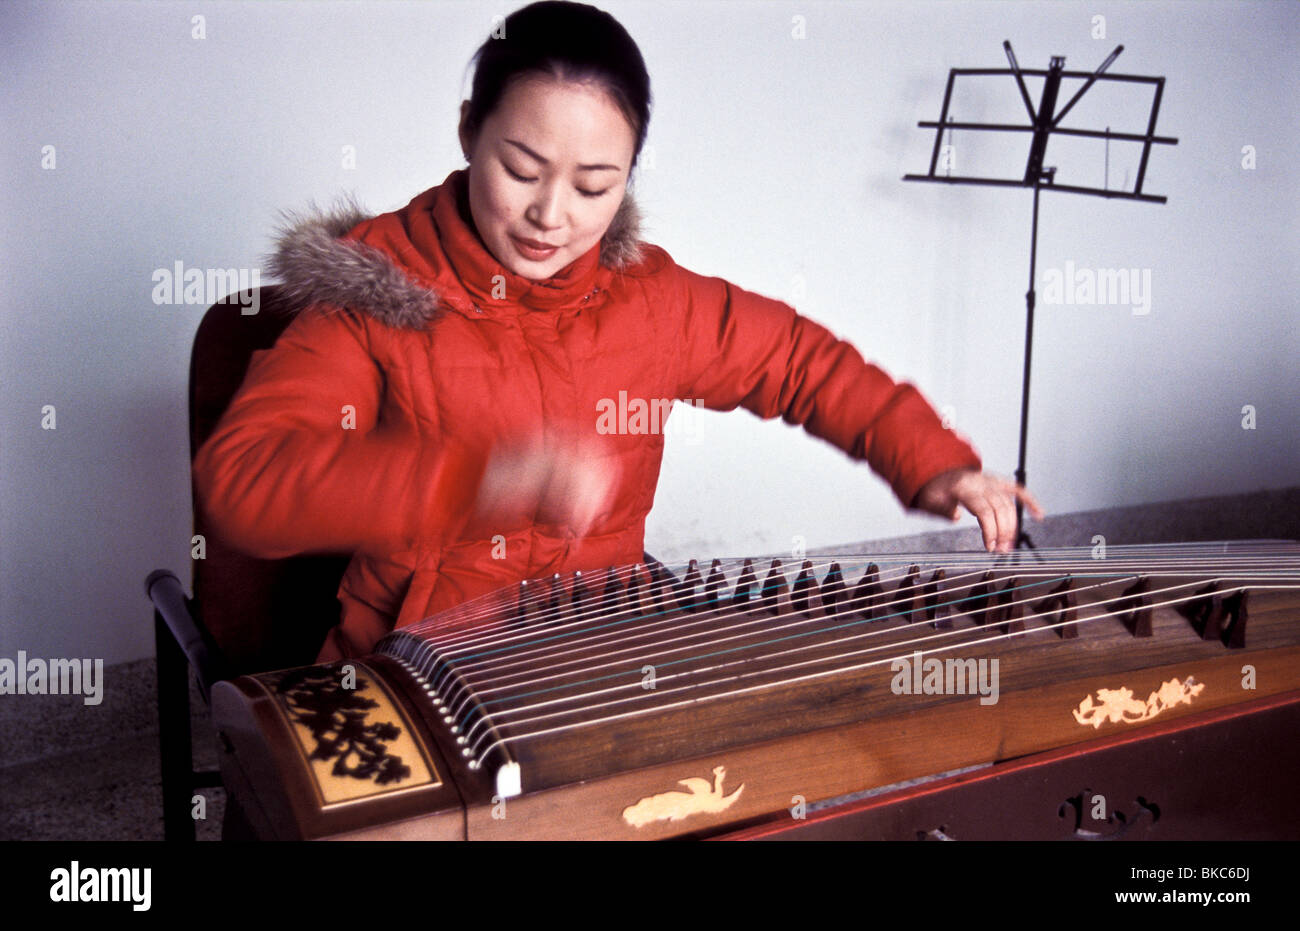 Zhang Lin, 23 plays with one of China’s oldest and noblest musical instruments, the Zheng, similar to Japan's Koto. Stock Photo